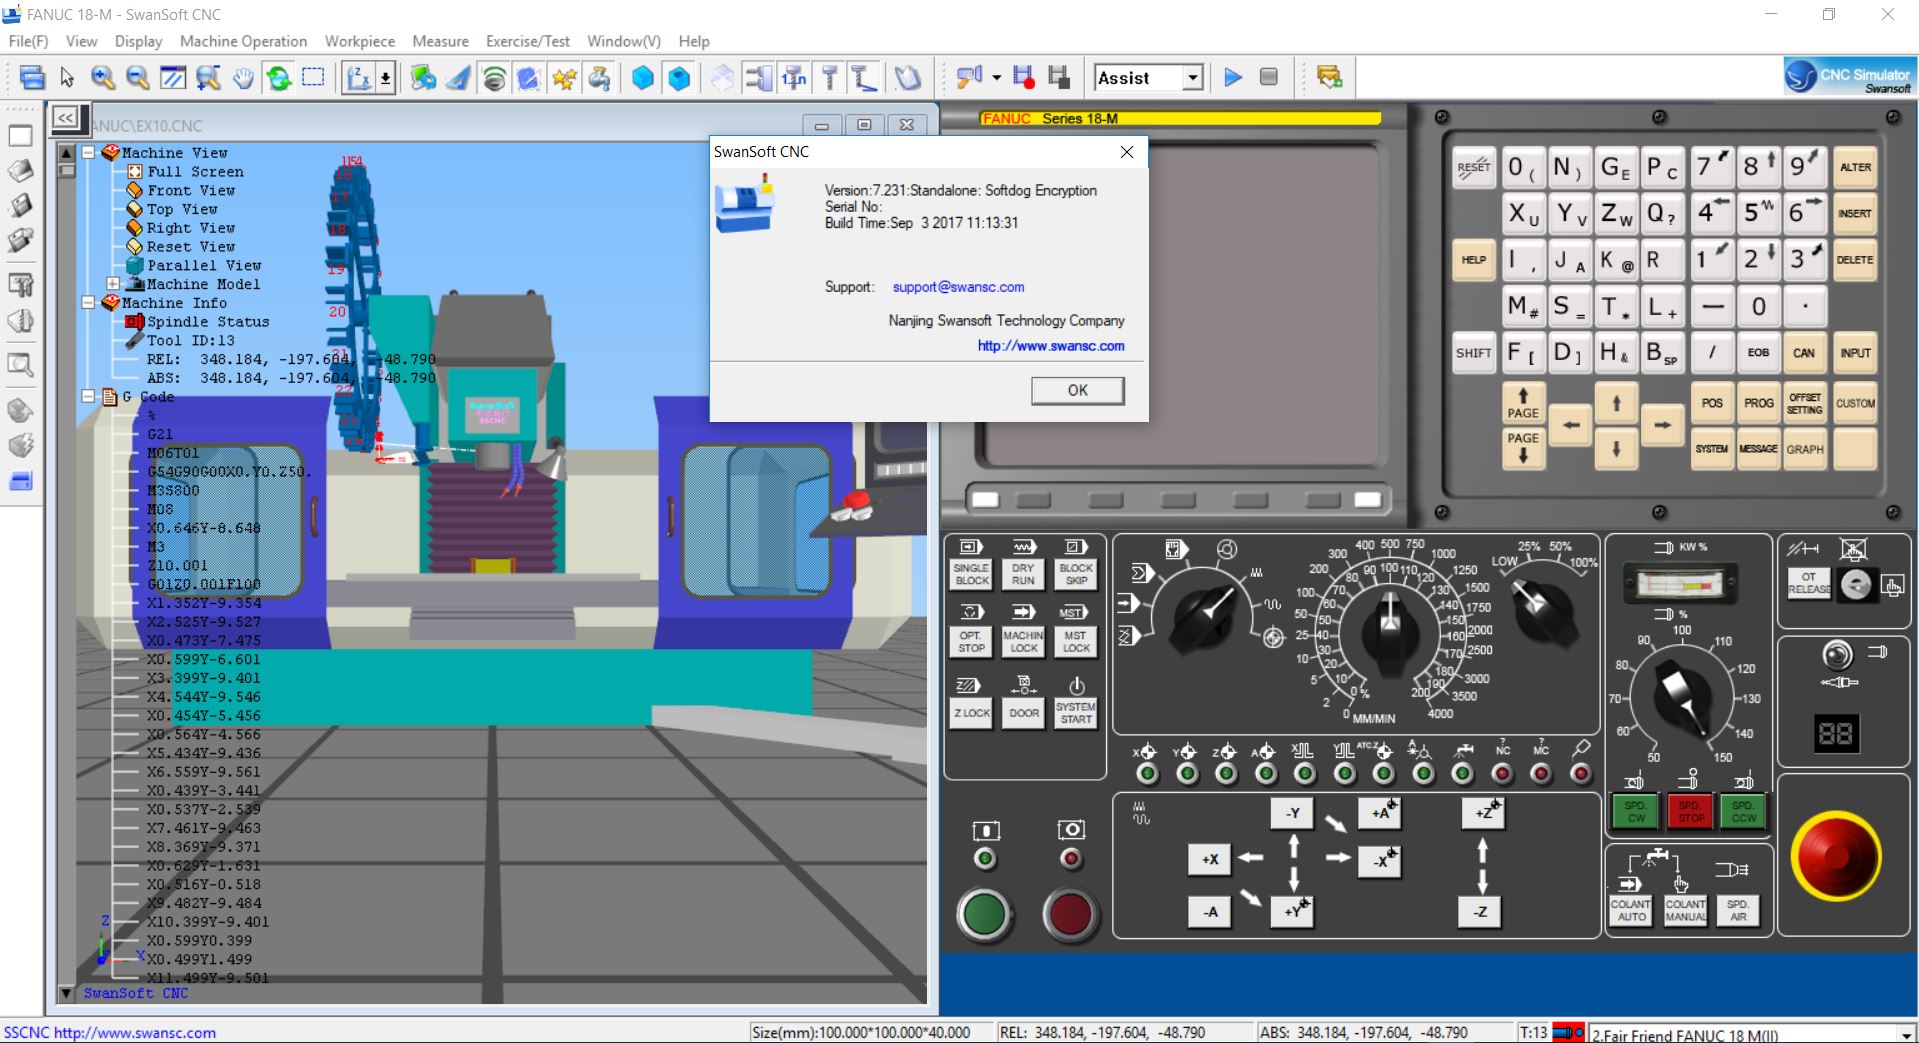 download-nanjing-swansoft-cnc-simulator-7-2-2-0-x86-x64-full-license-click-to-download-items